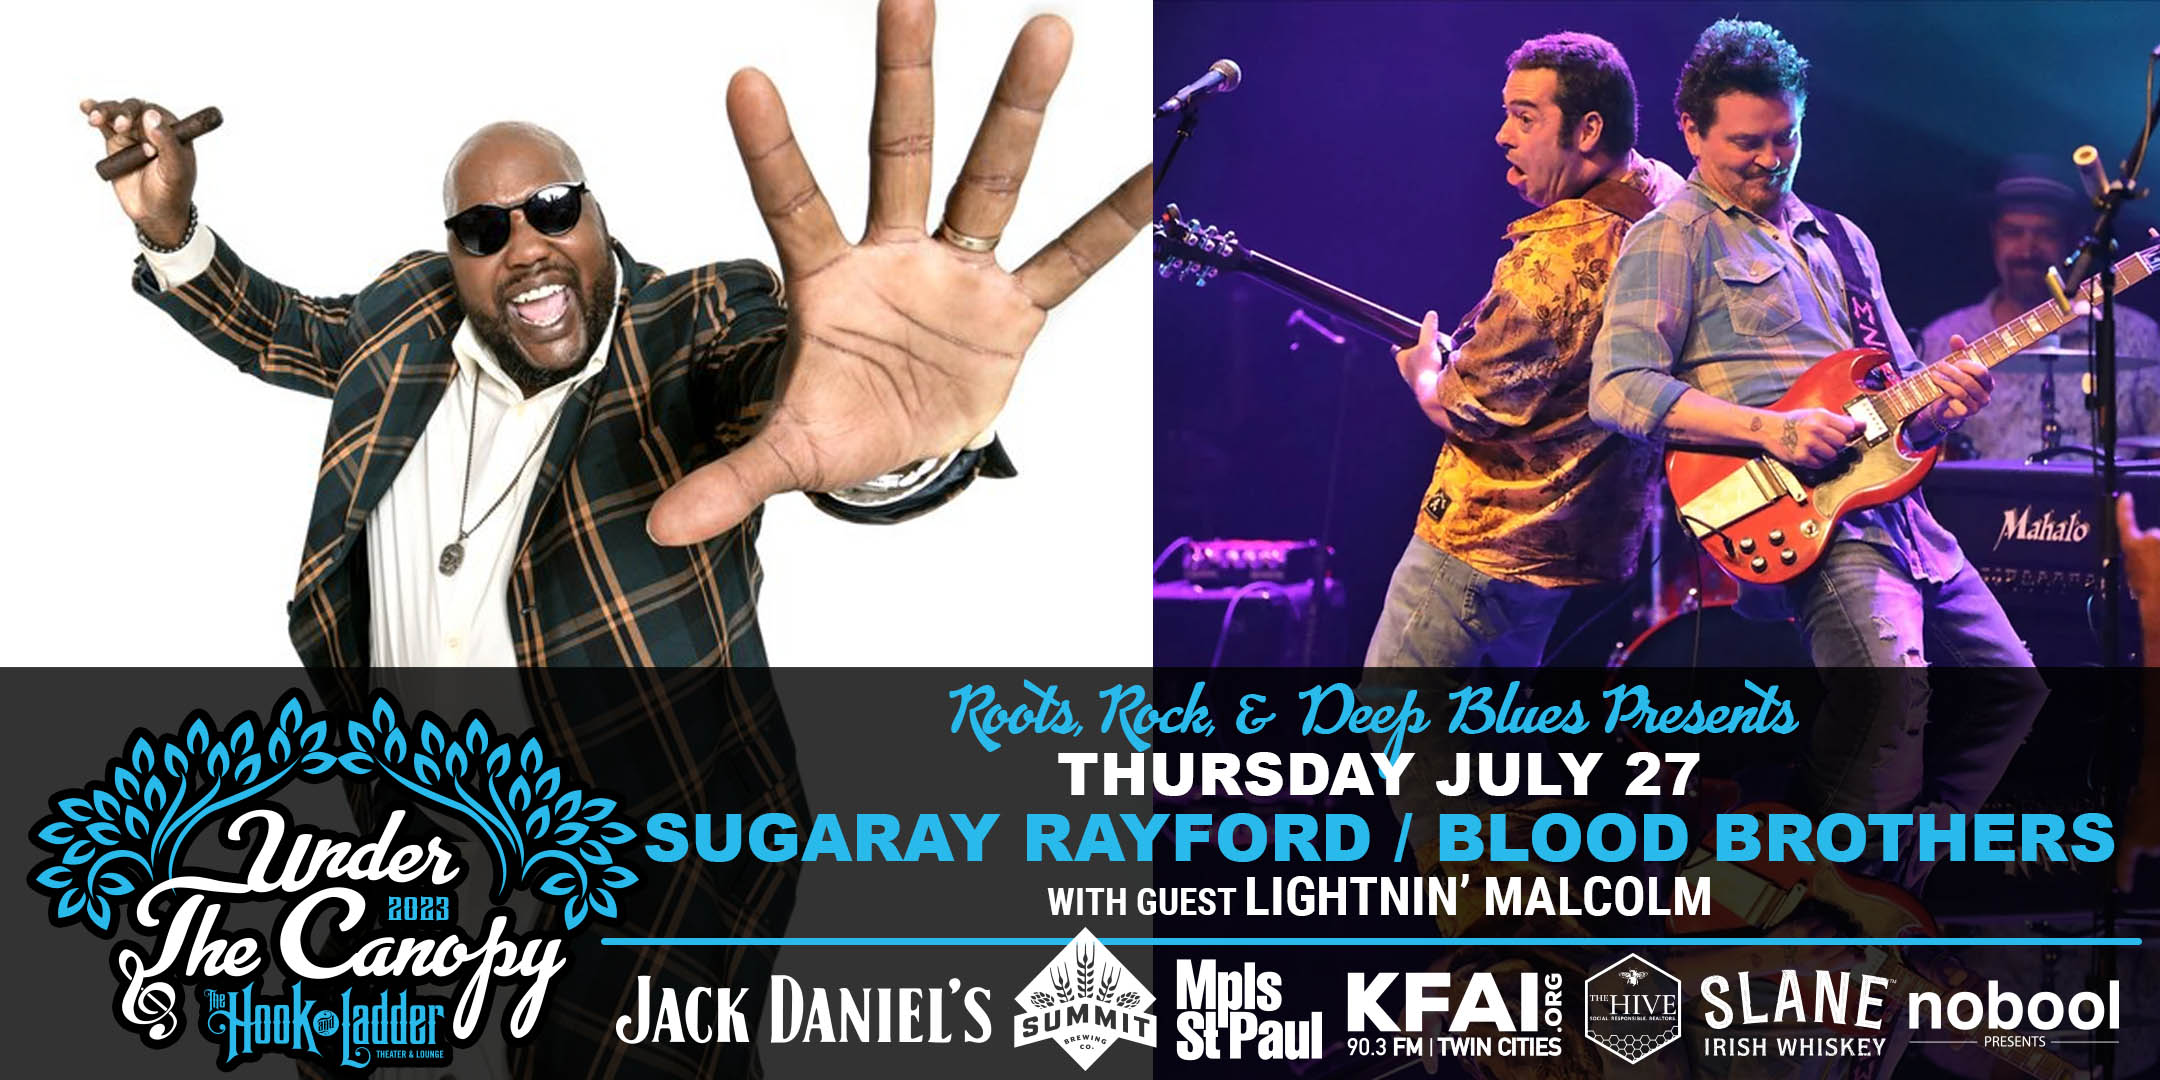 Roots, Rock, & Deep Blues & MN Blues Society Presents Sugaray Rayford + Blood Brothers with Lightnin Malcolm Thursday, July 27 30, 2023 Under The Canopy at The Hook and Ladder Theater "An Urban Outdoor Summer Concert Series" Doors 6:00pm :: Music 7:00pm :: 21+ Reserved Seats: $50 GA: $35 ADV / $40 DOS